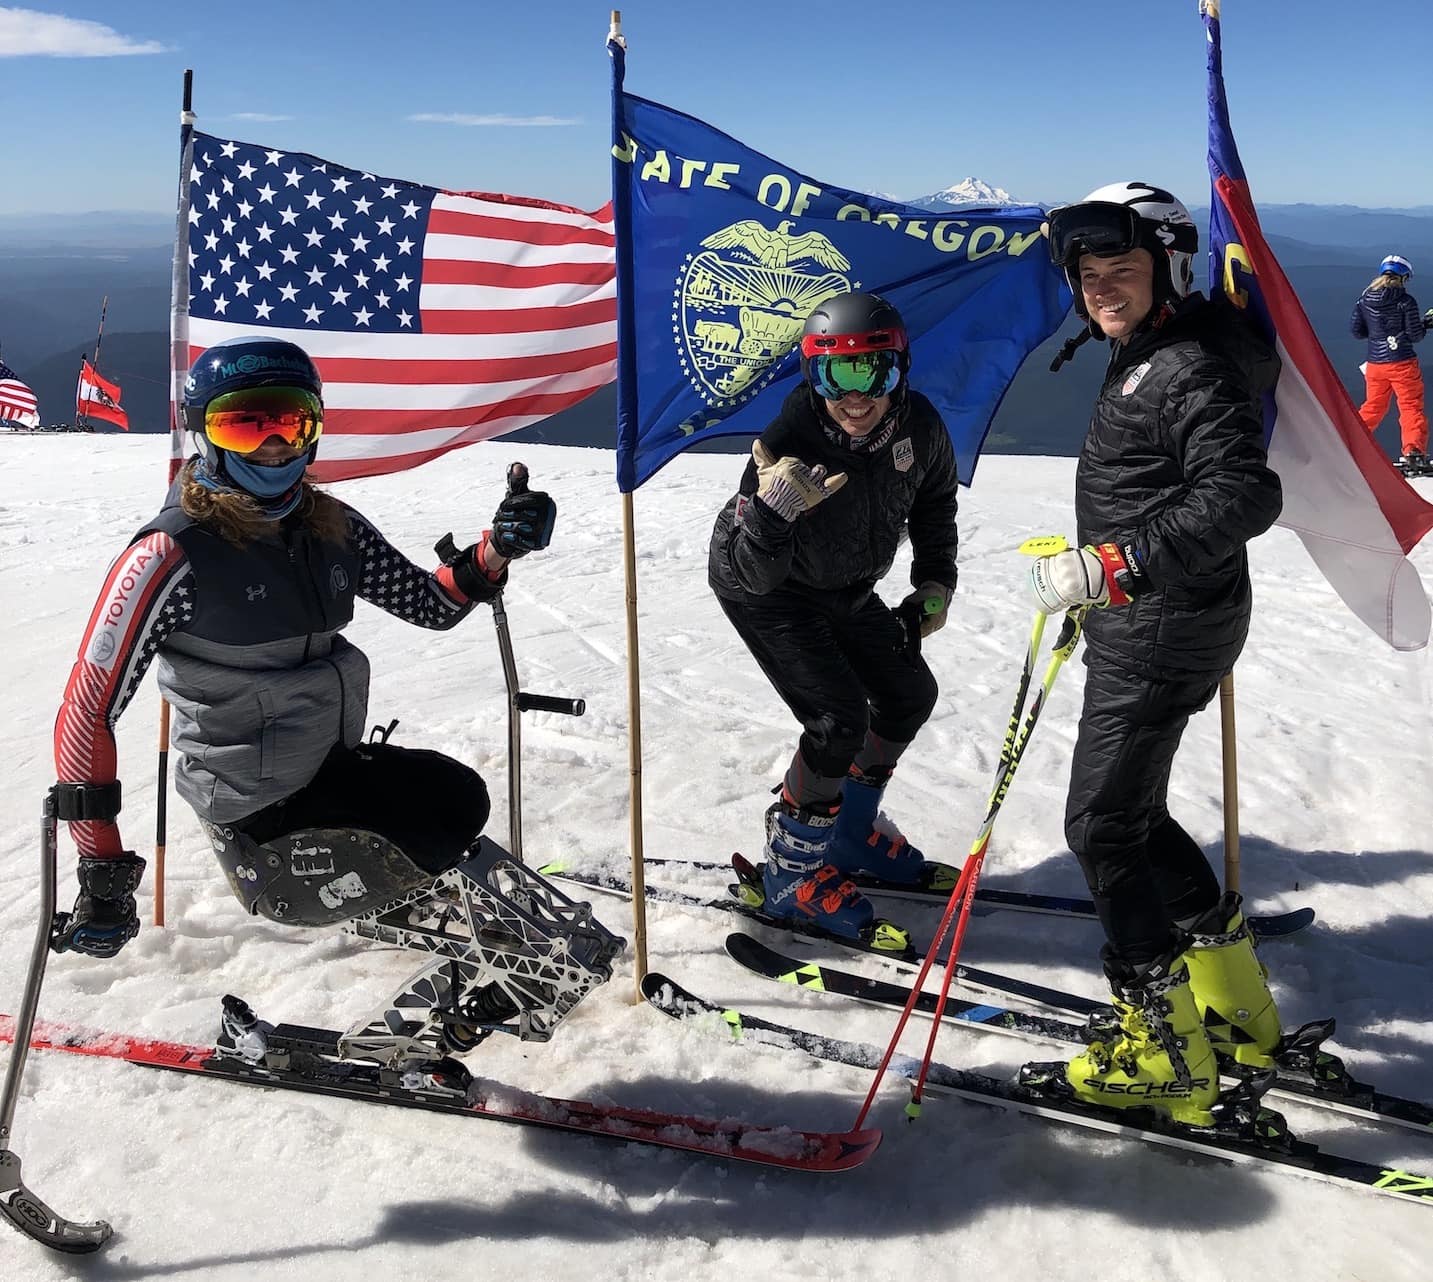 Three skiers pose with flags on the snow